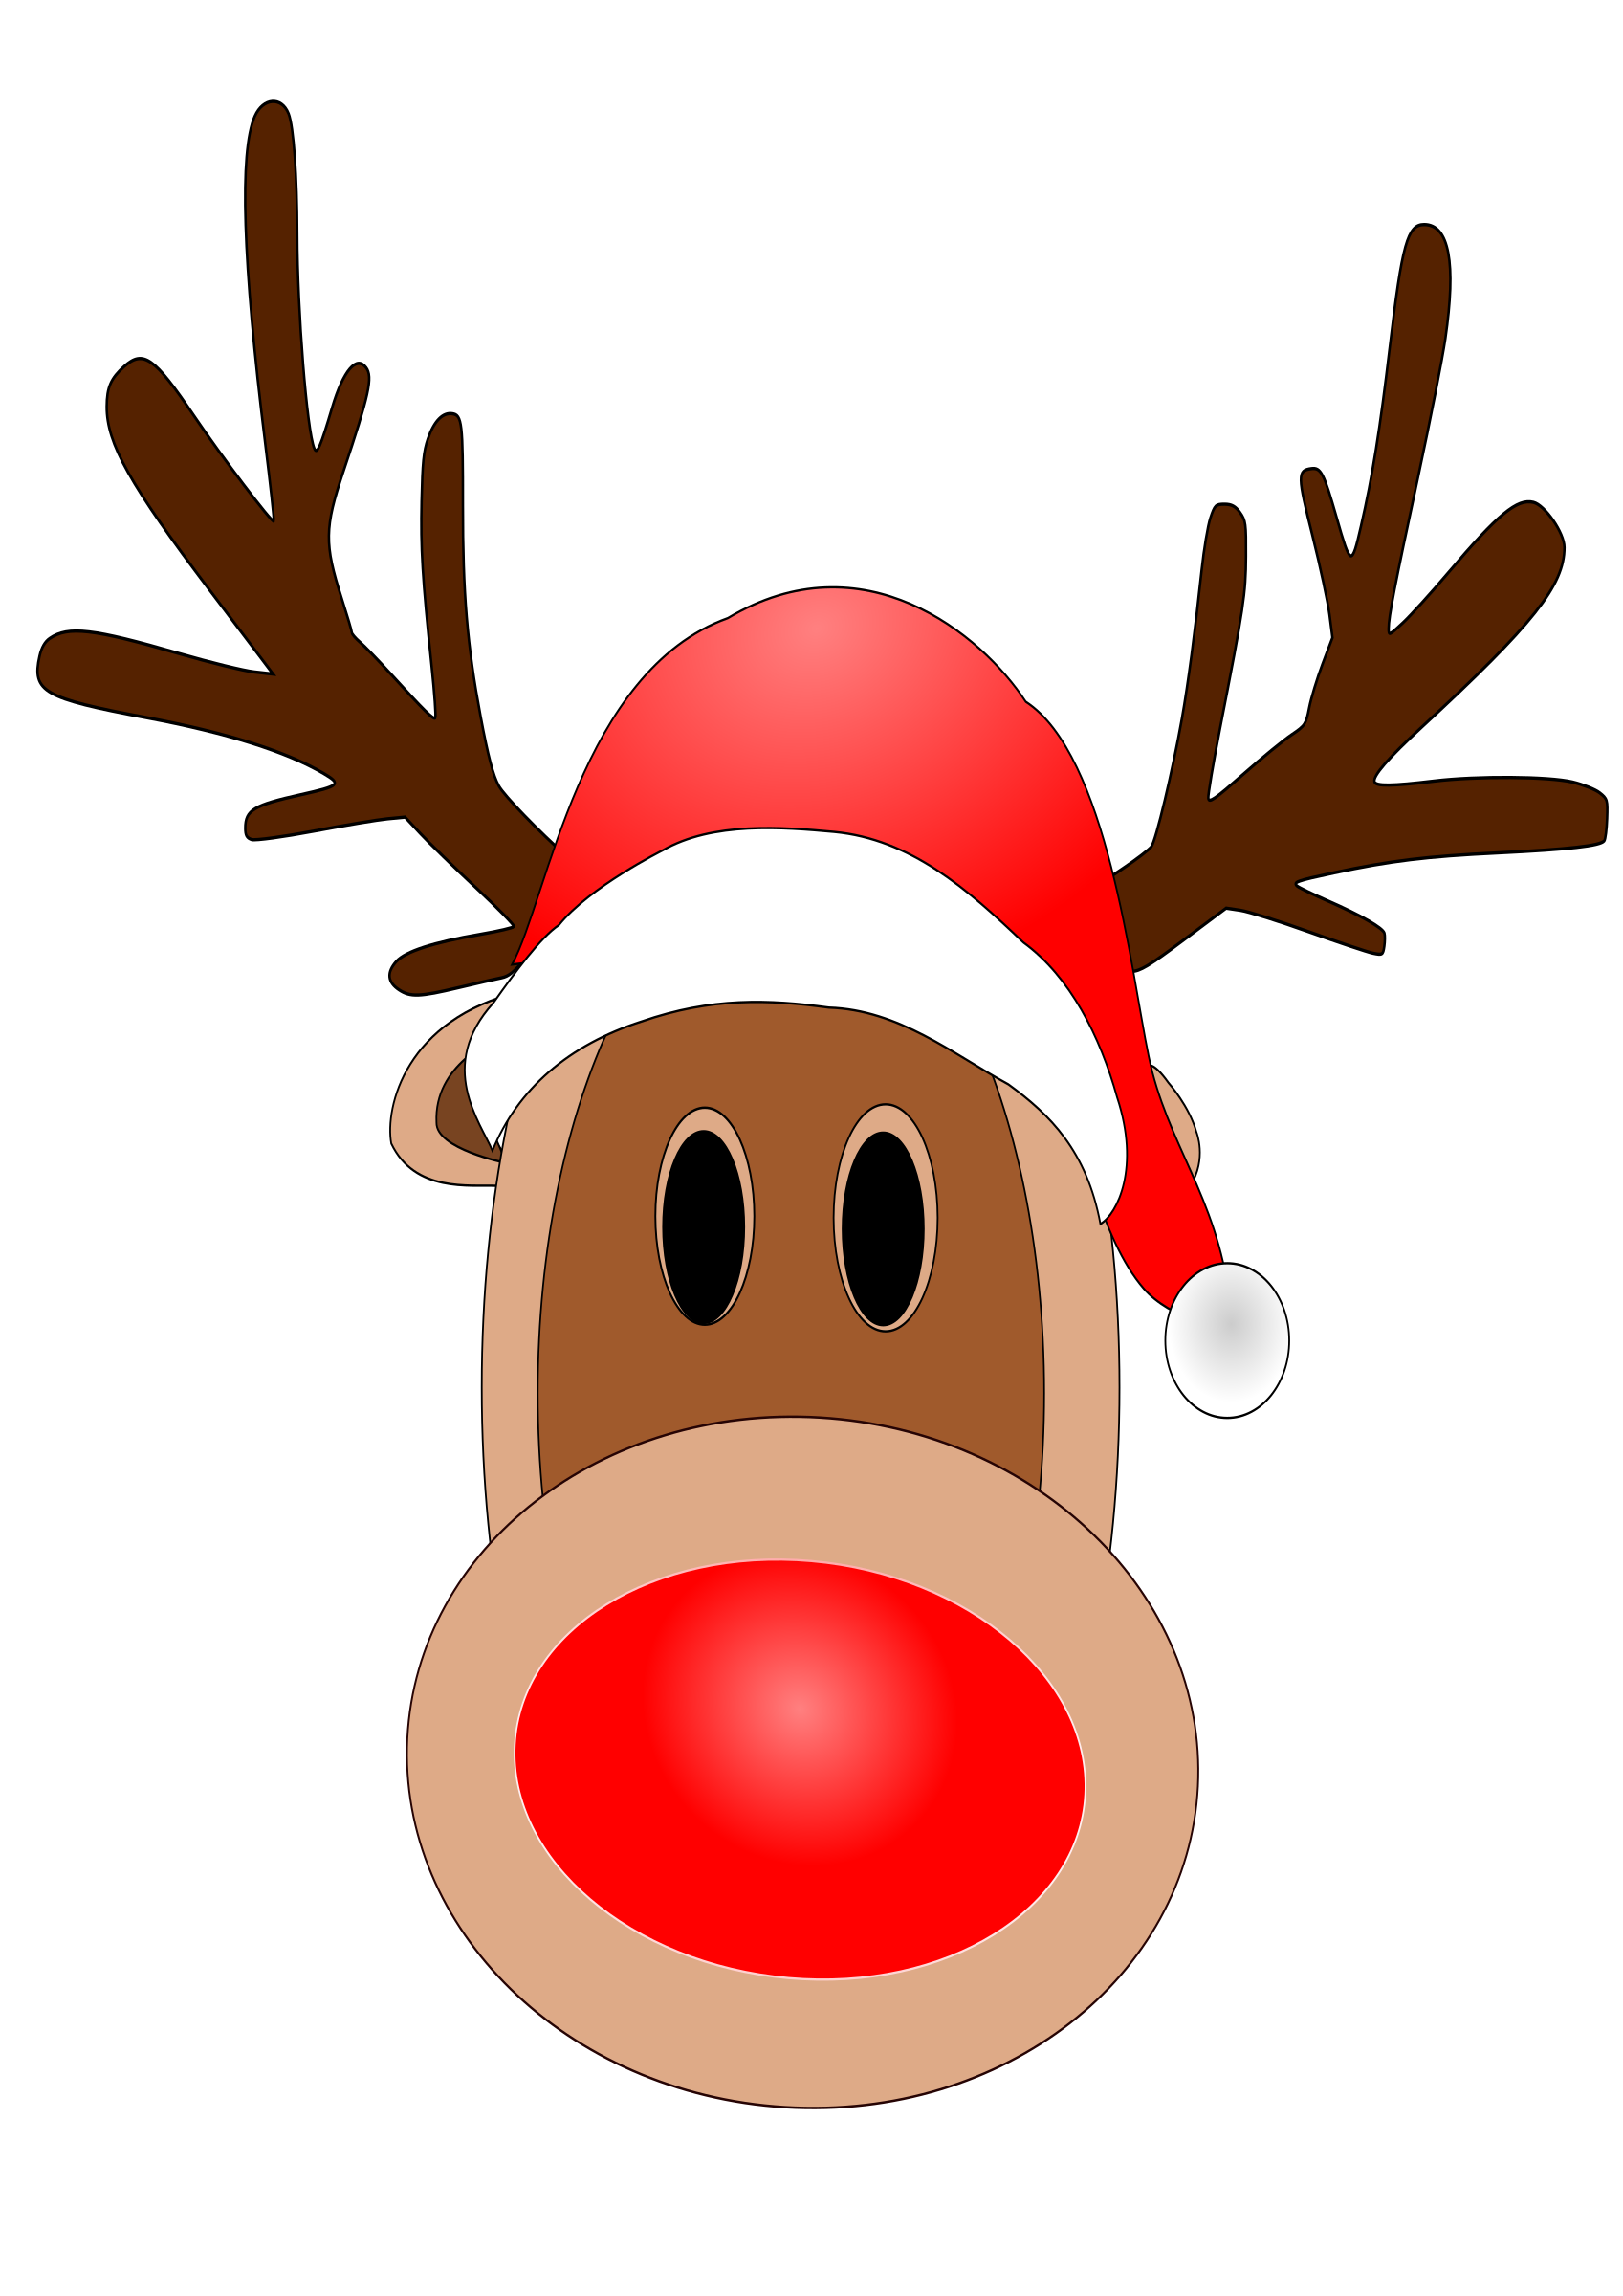 Reindeer with Red Nose vector clipart image - Free stock photo - Public